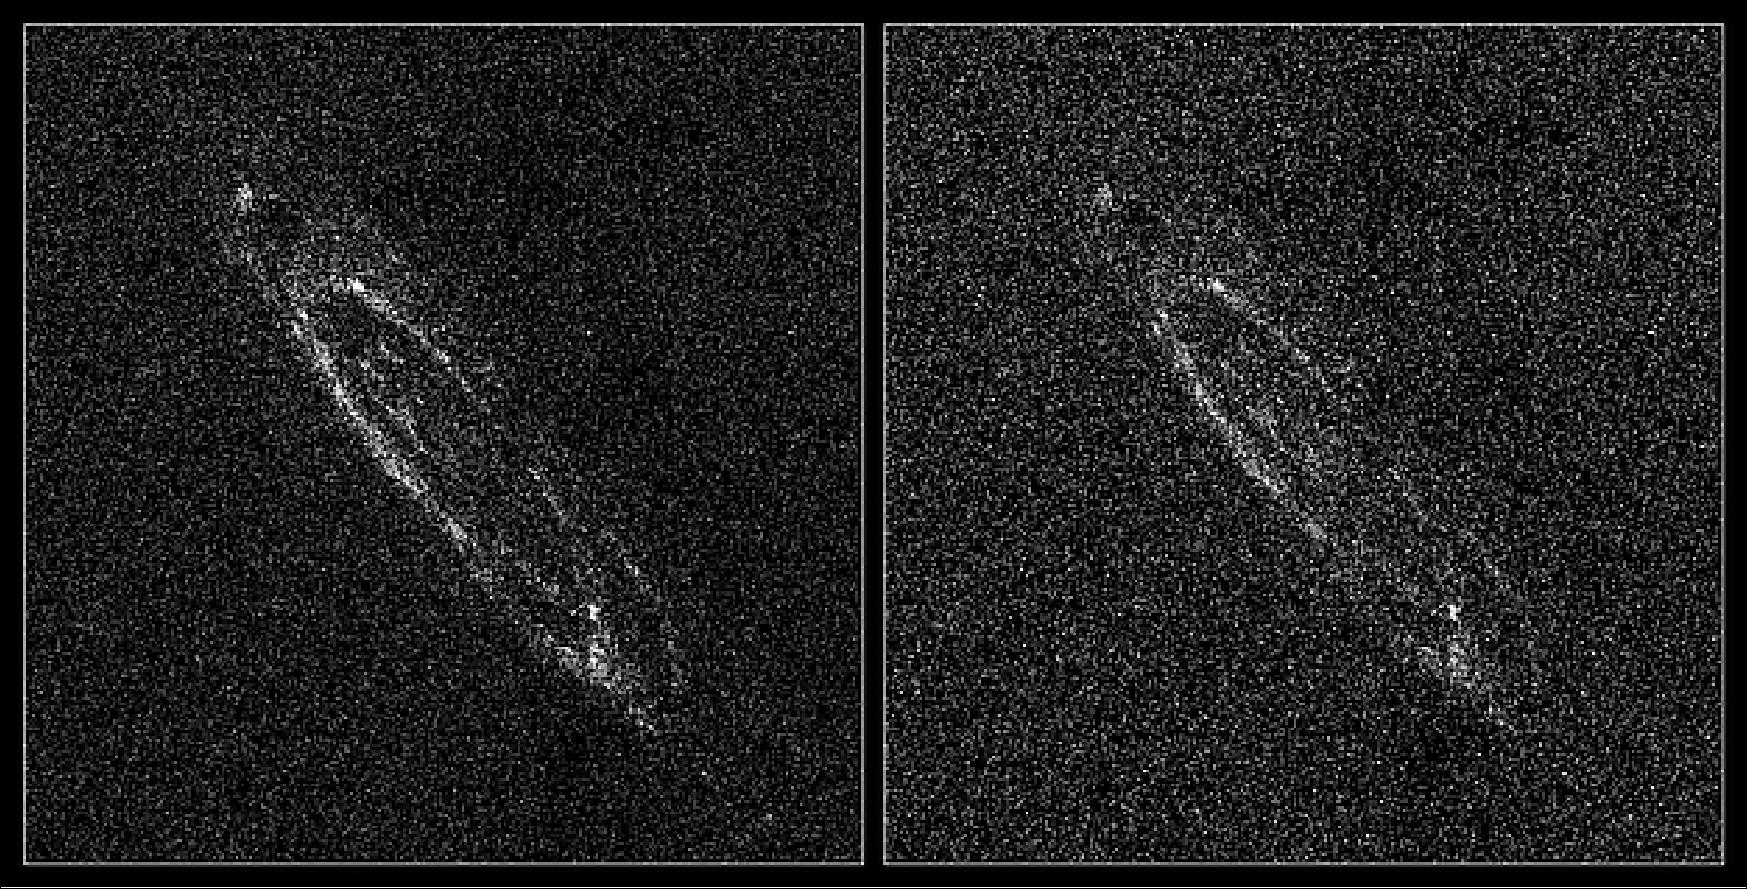 Figure 58: The Andromeda galaxy, or M31, the largest galactic neighbor to our Milky Way, as viewed by ESA's Gaia satellite after its first 14 months of operations. These views are not photographs but were compiled by mapping the total density of stars (left) and the total amount of radiation, or flux (right), detected by Gaia in each pixel (image credit: ESA/Gaia/DPAC)